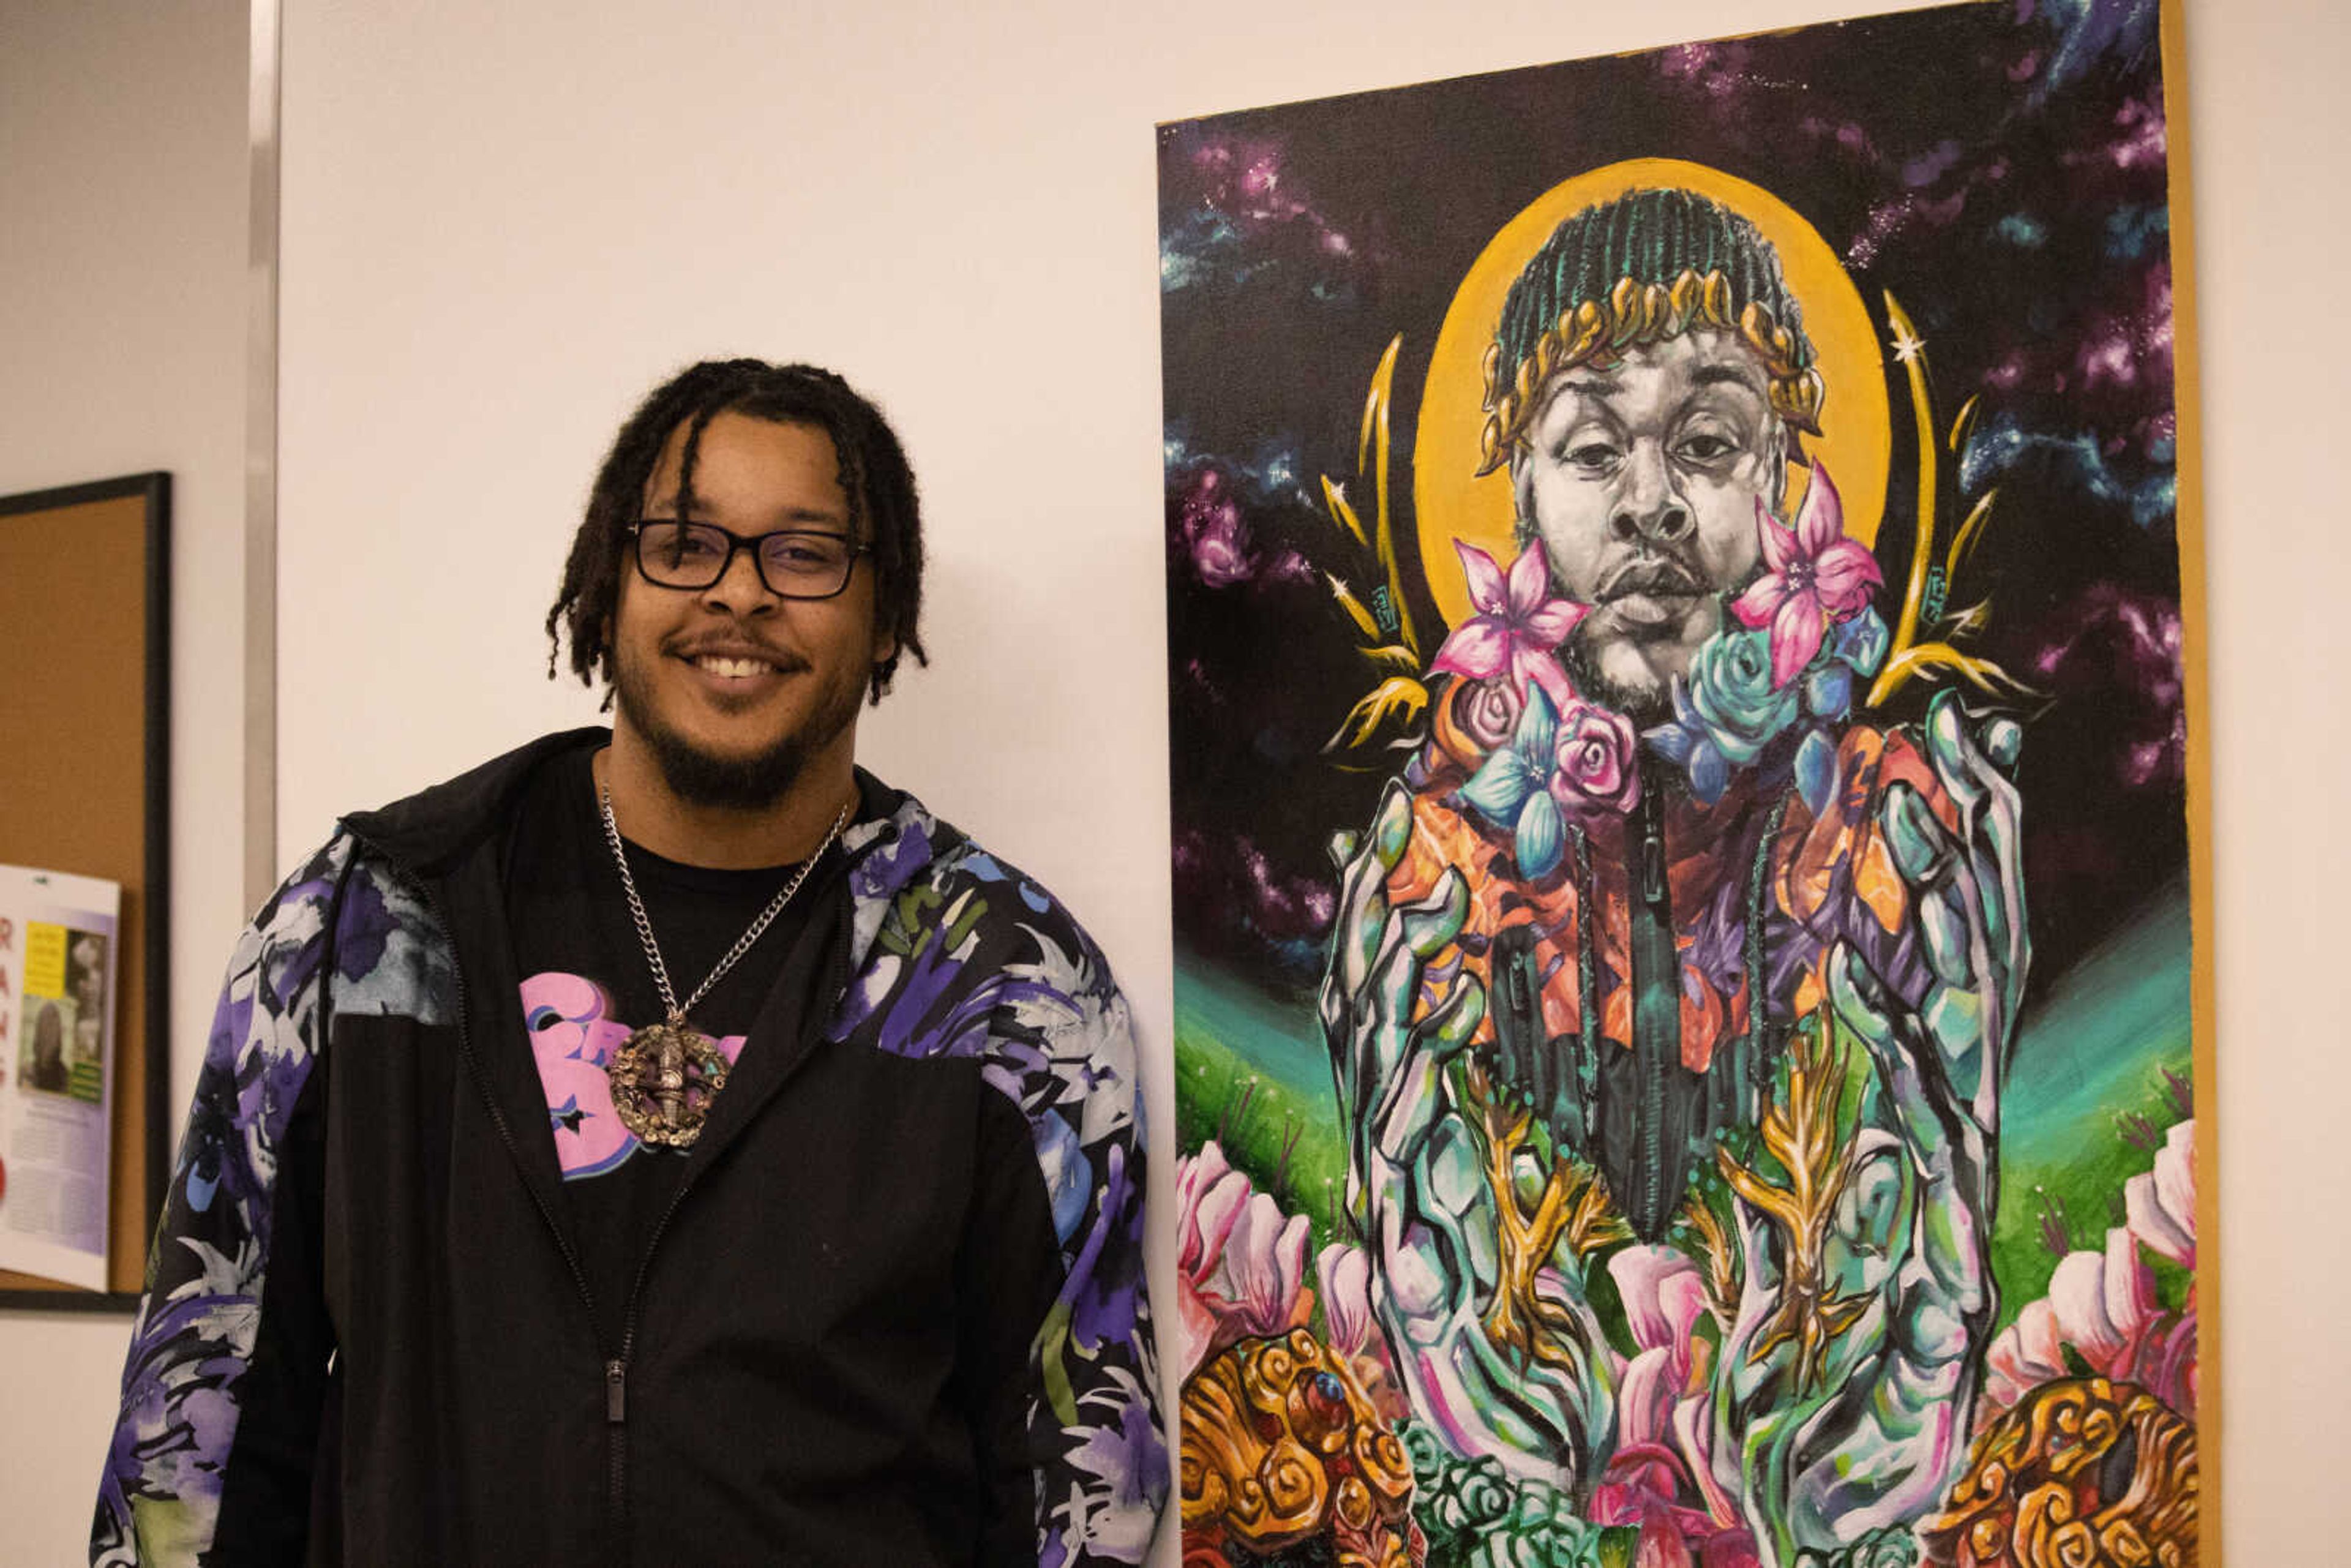 SEMO alum and artist Tyler Harris poses next to his art piece, “Rebirth.” Harris graduated from SEMO in 2016 with a degree in Art Education, and is currently a middle school art teacher. All of Harris’s featured works in his gallery are for sale, ranging from $300 to $2200.